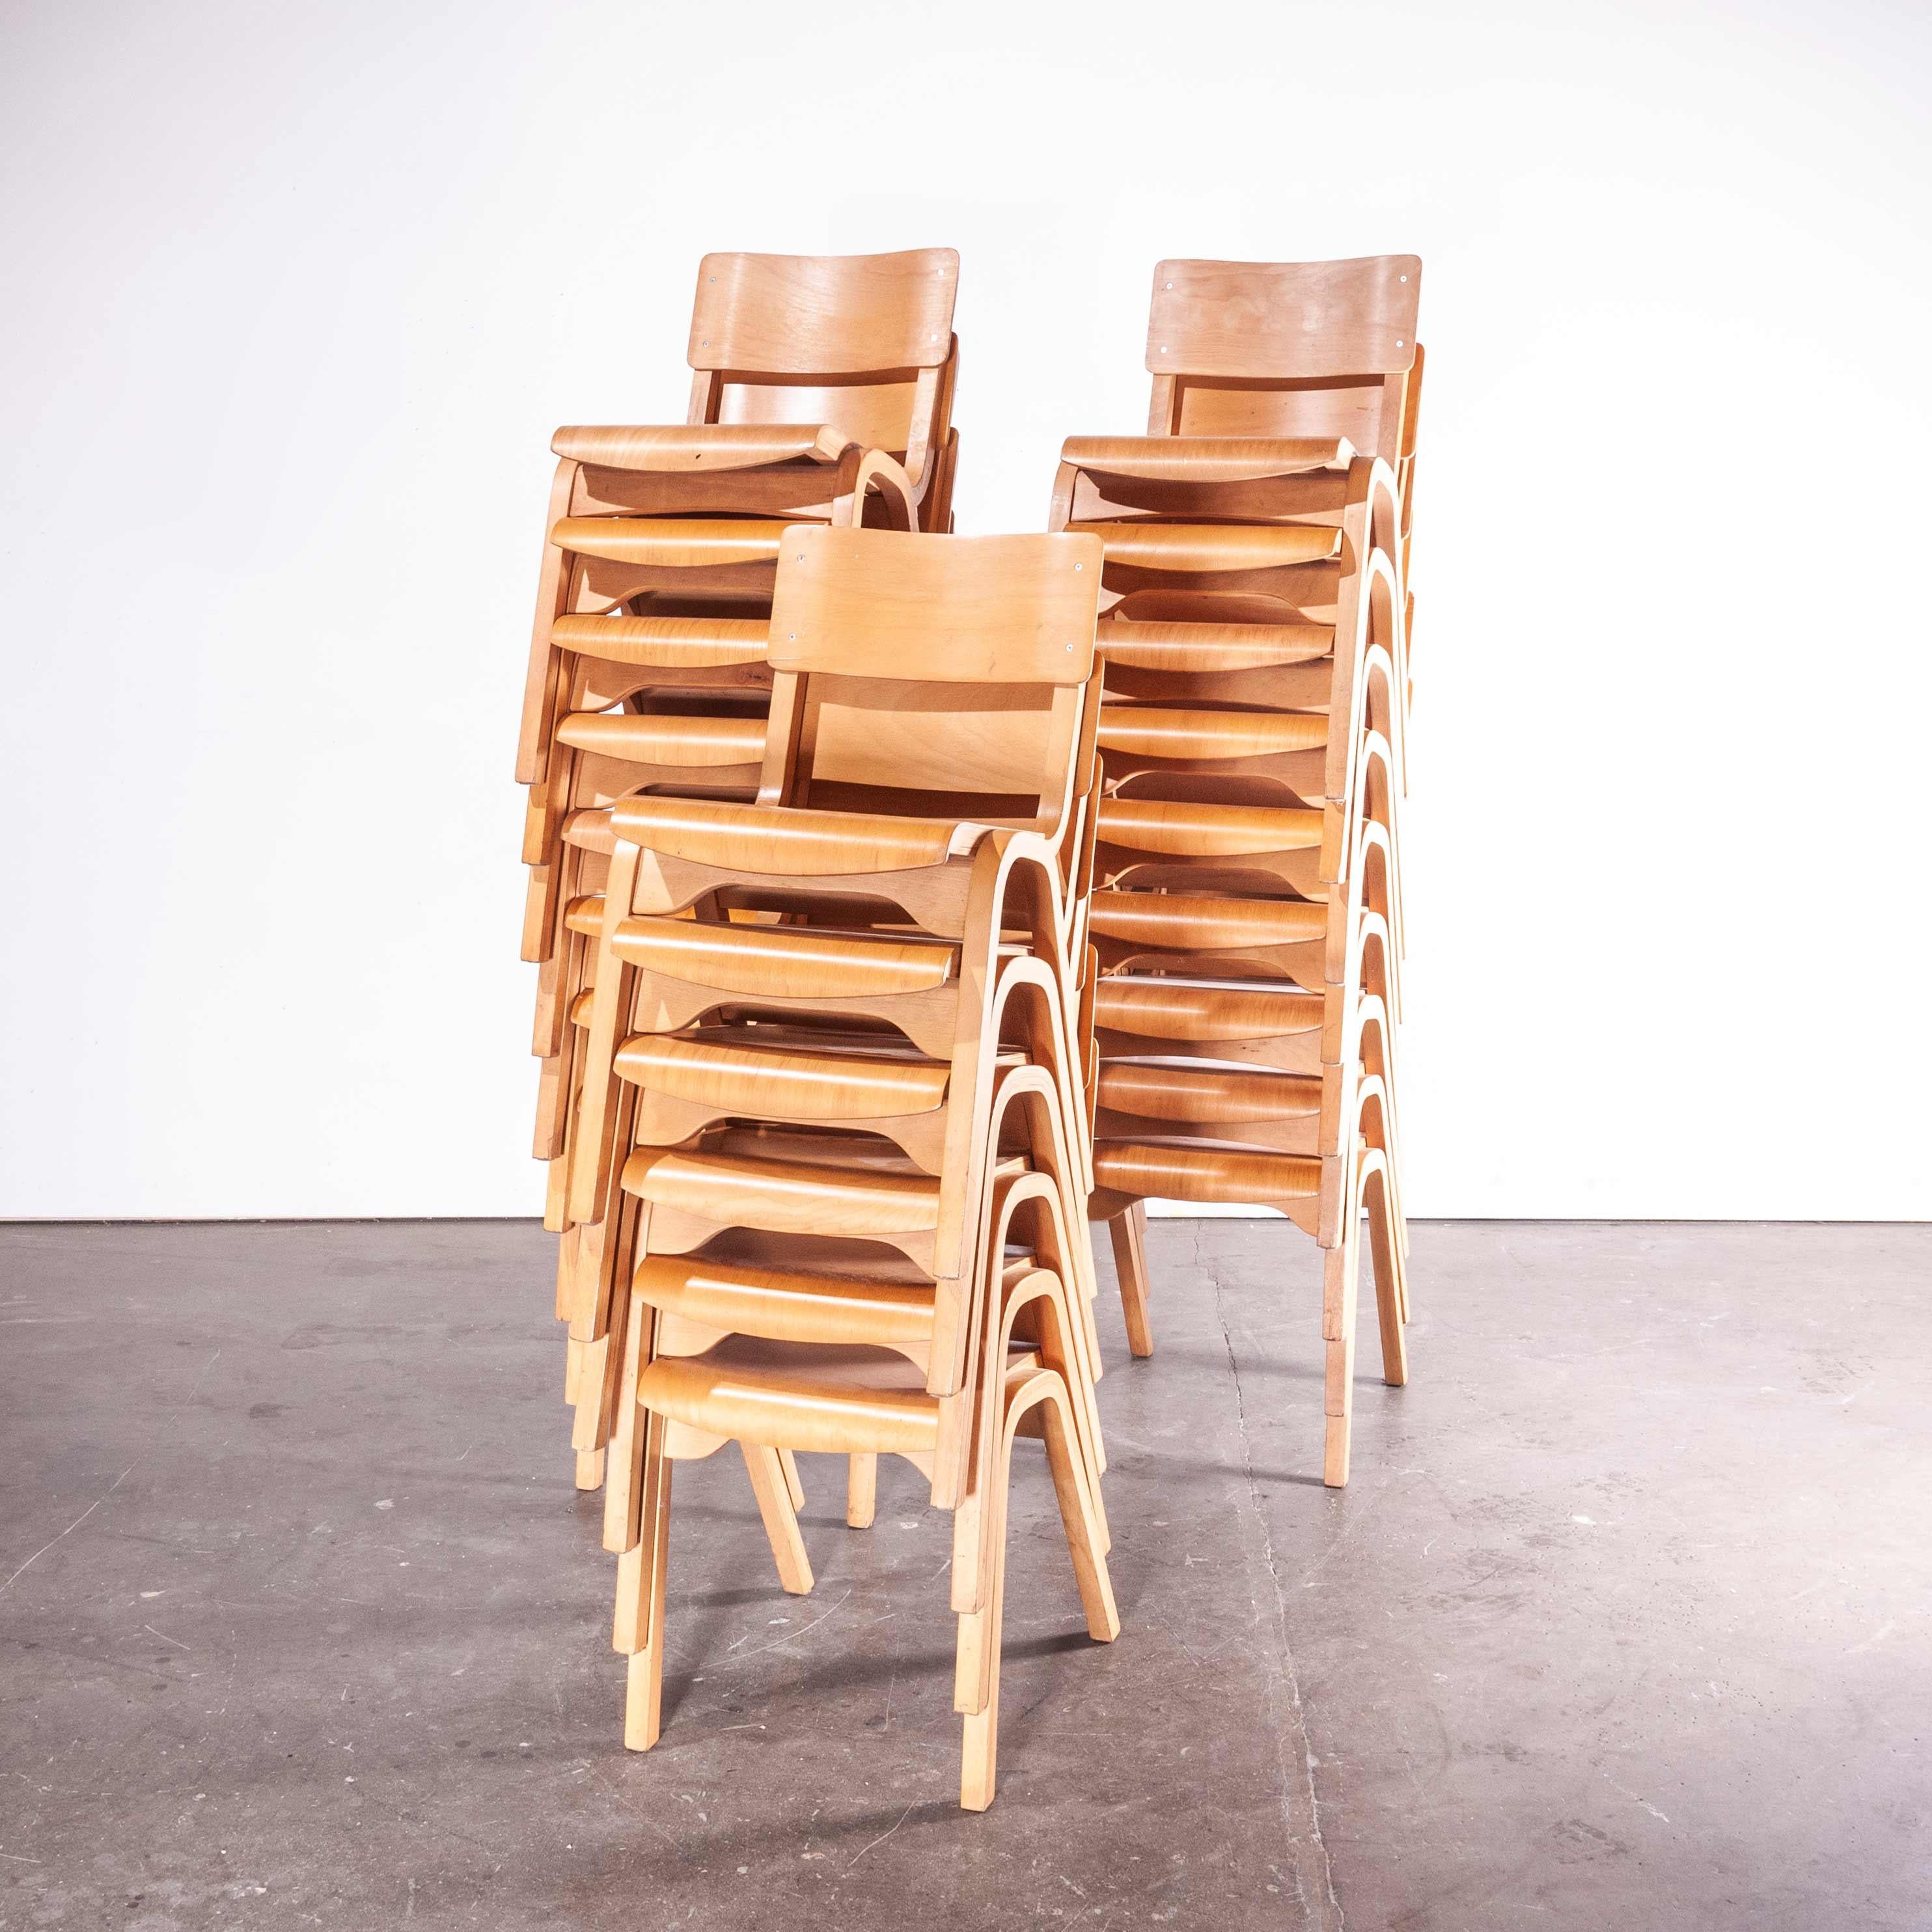 1950s stacking dining chairs by Lamstak, set of twenty four
1950s stacking dining chairs by Lamstak, set of twenty four. Lamstak was a large producer of chairs in the midcentury period. They pioneered making chairs using laminated beech bentwood